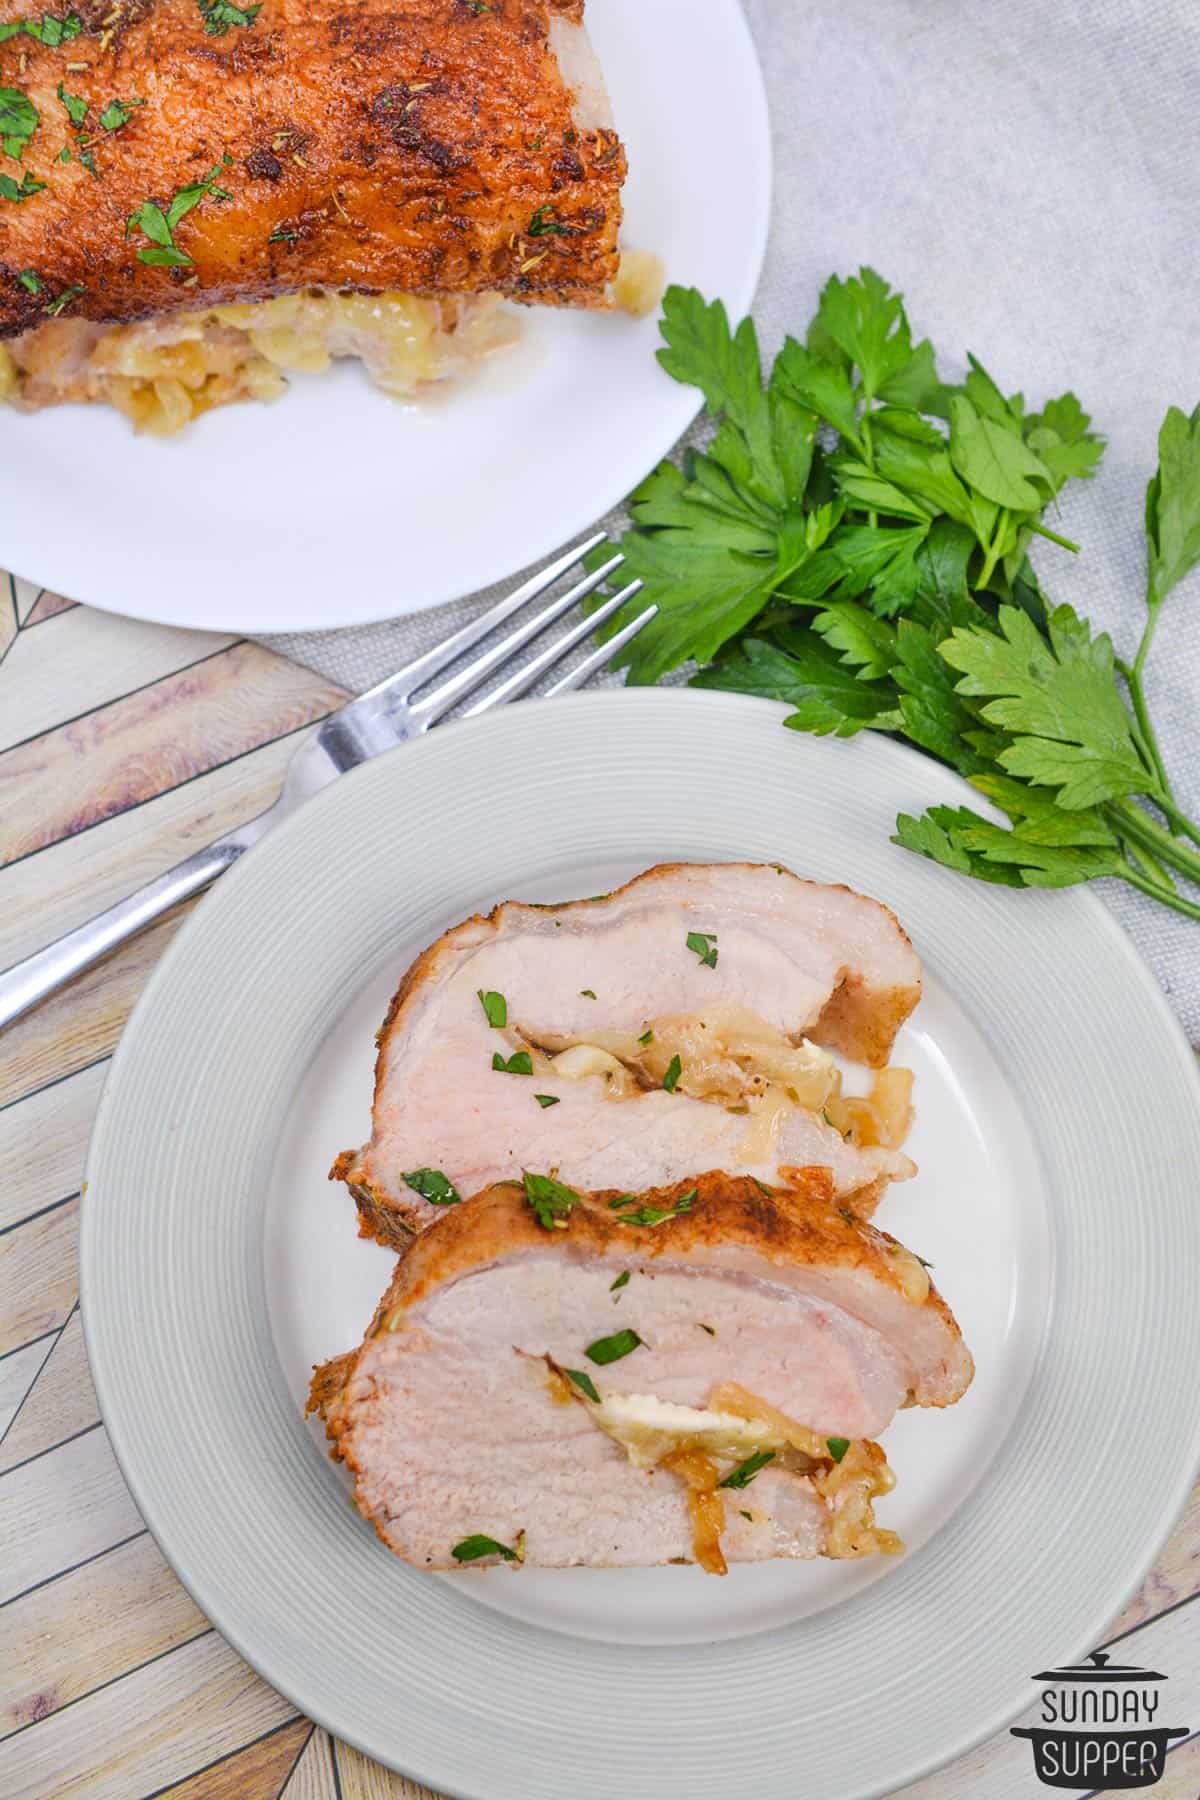 slices of stuffed pork tenderloin on a dinner plate with extra parsley